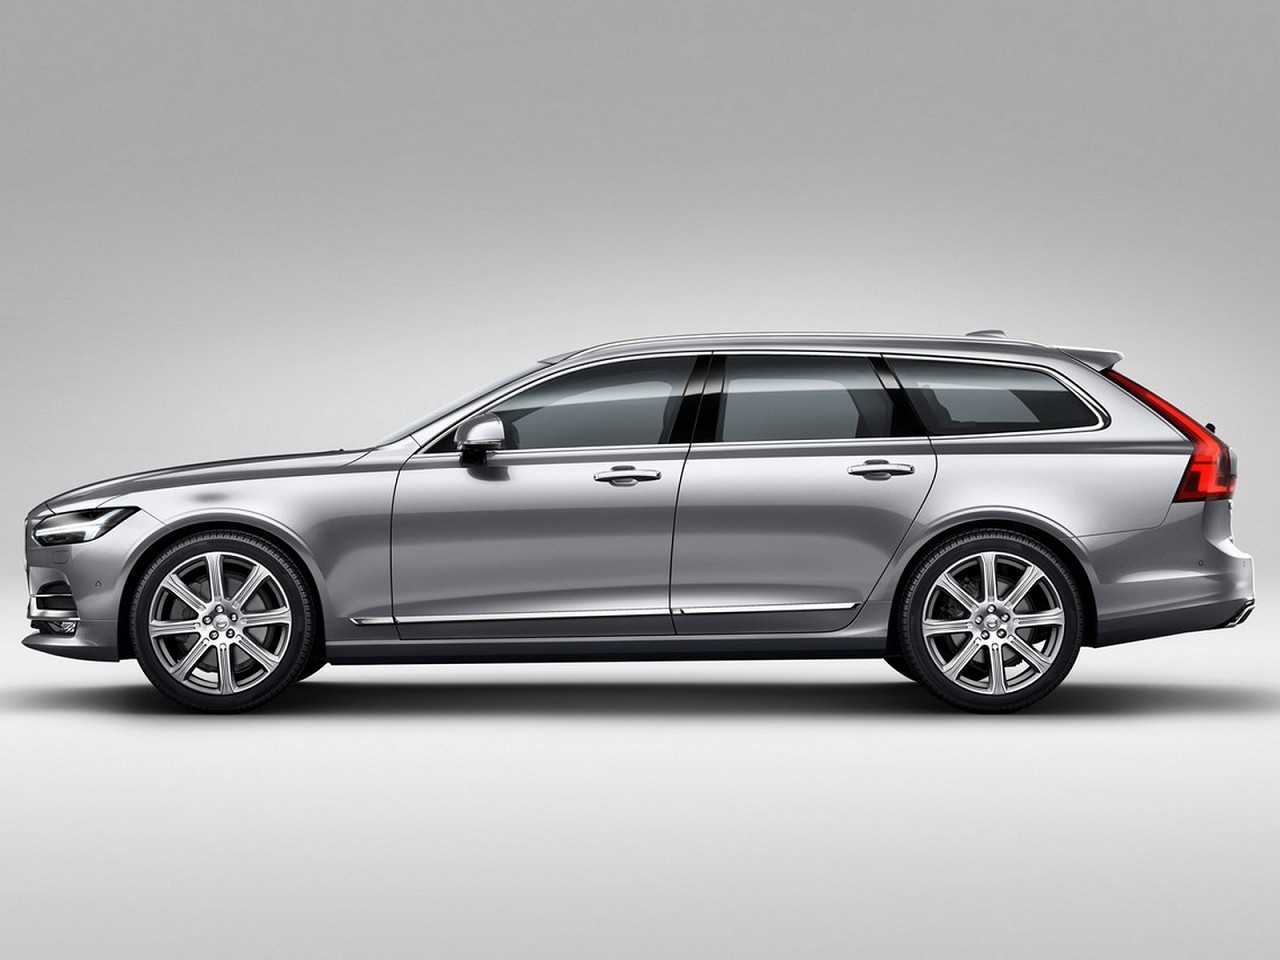 VolvoV90 2016 - lateral